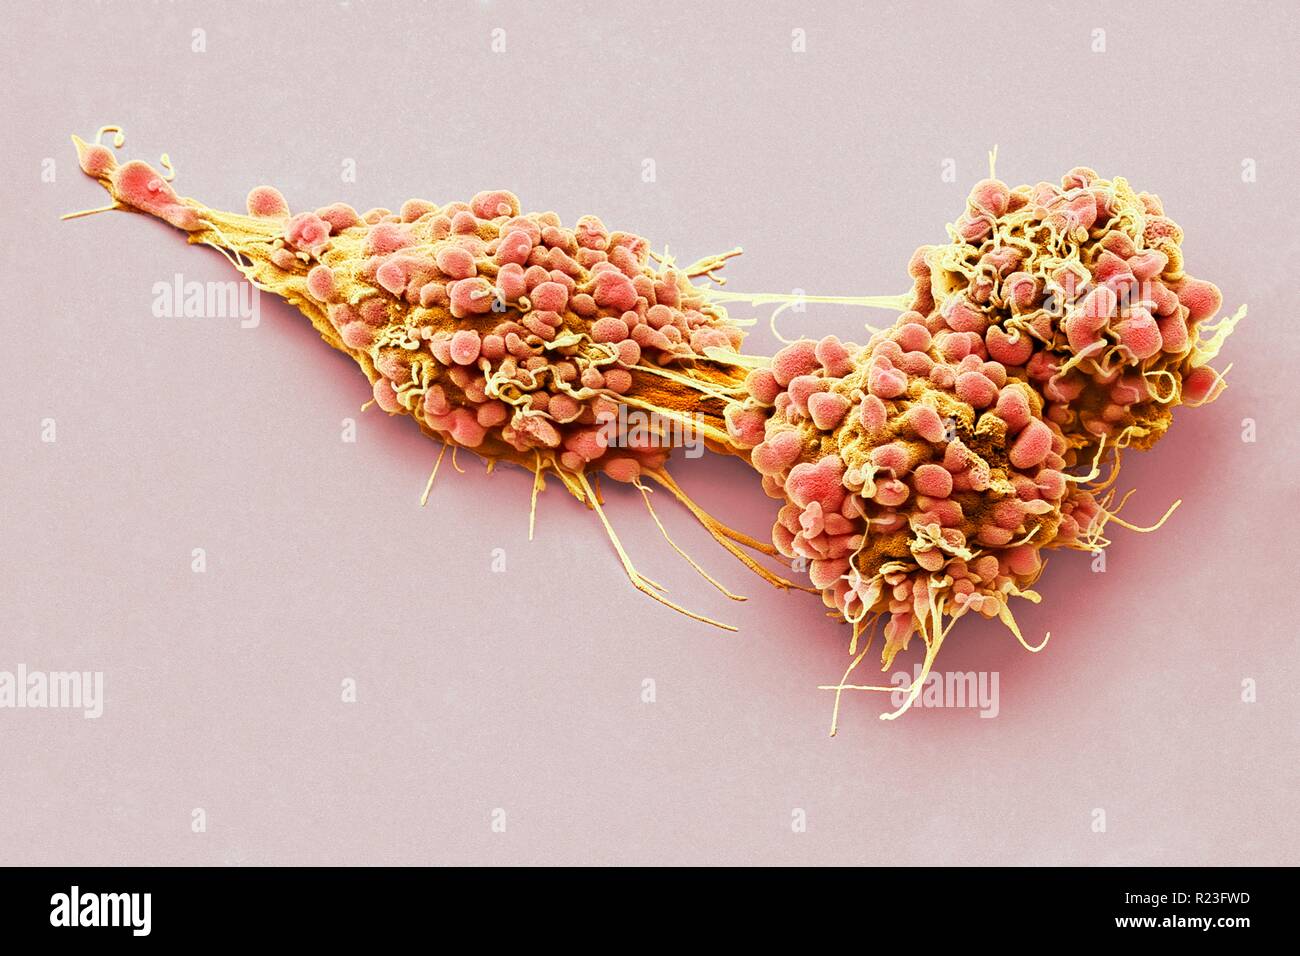 Ovarian cancer cells. Coloured scanning electron micrograph (SEM) of ovarian cancer cells. Cancer cells are typically large, have an irregular surface Stock Photo